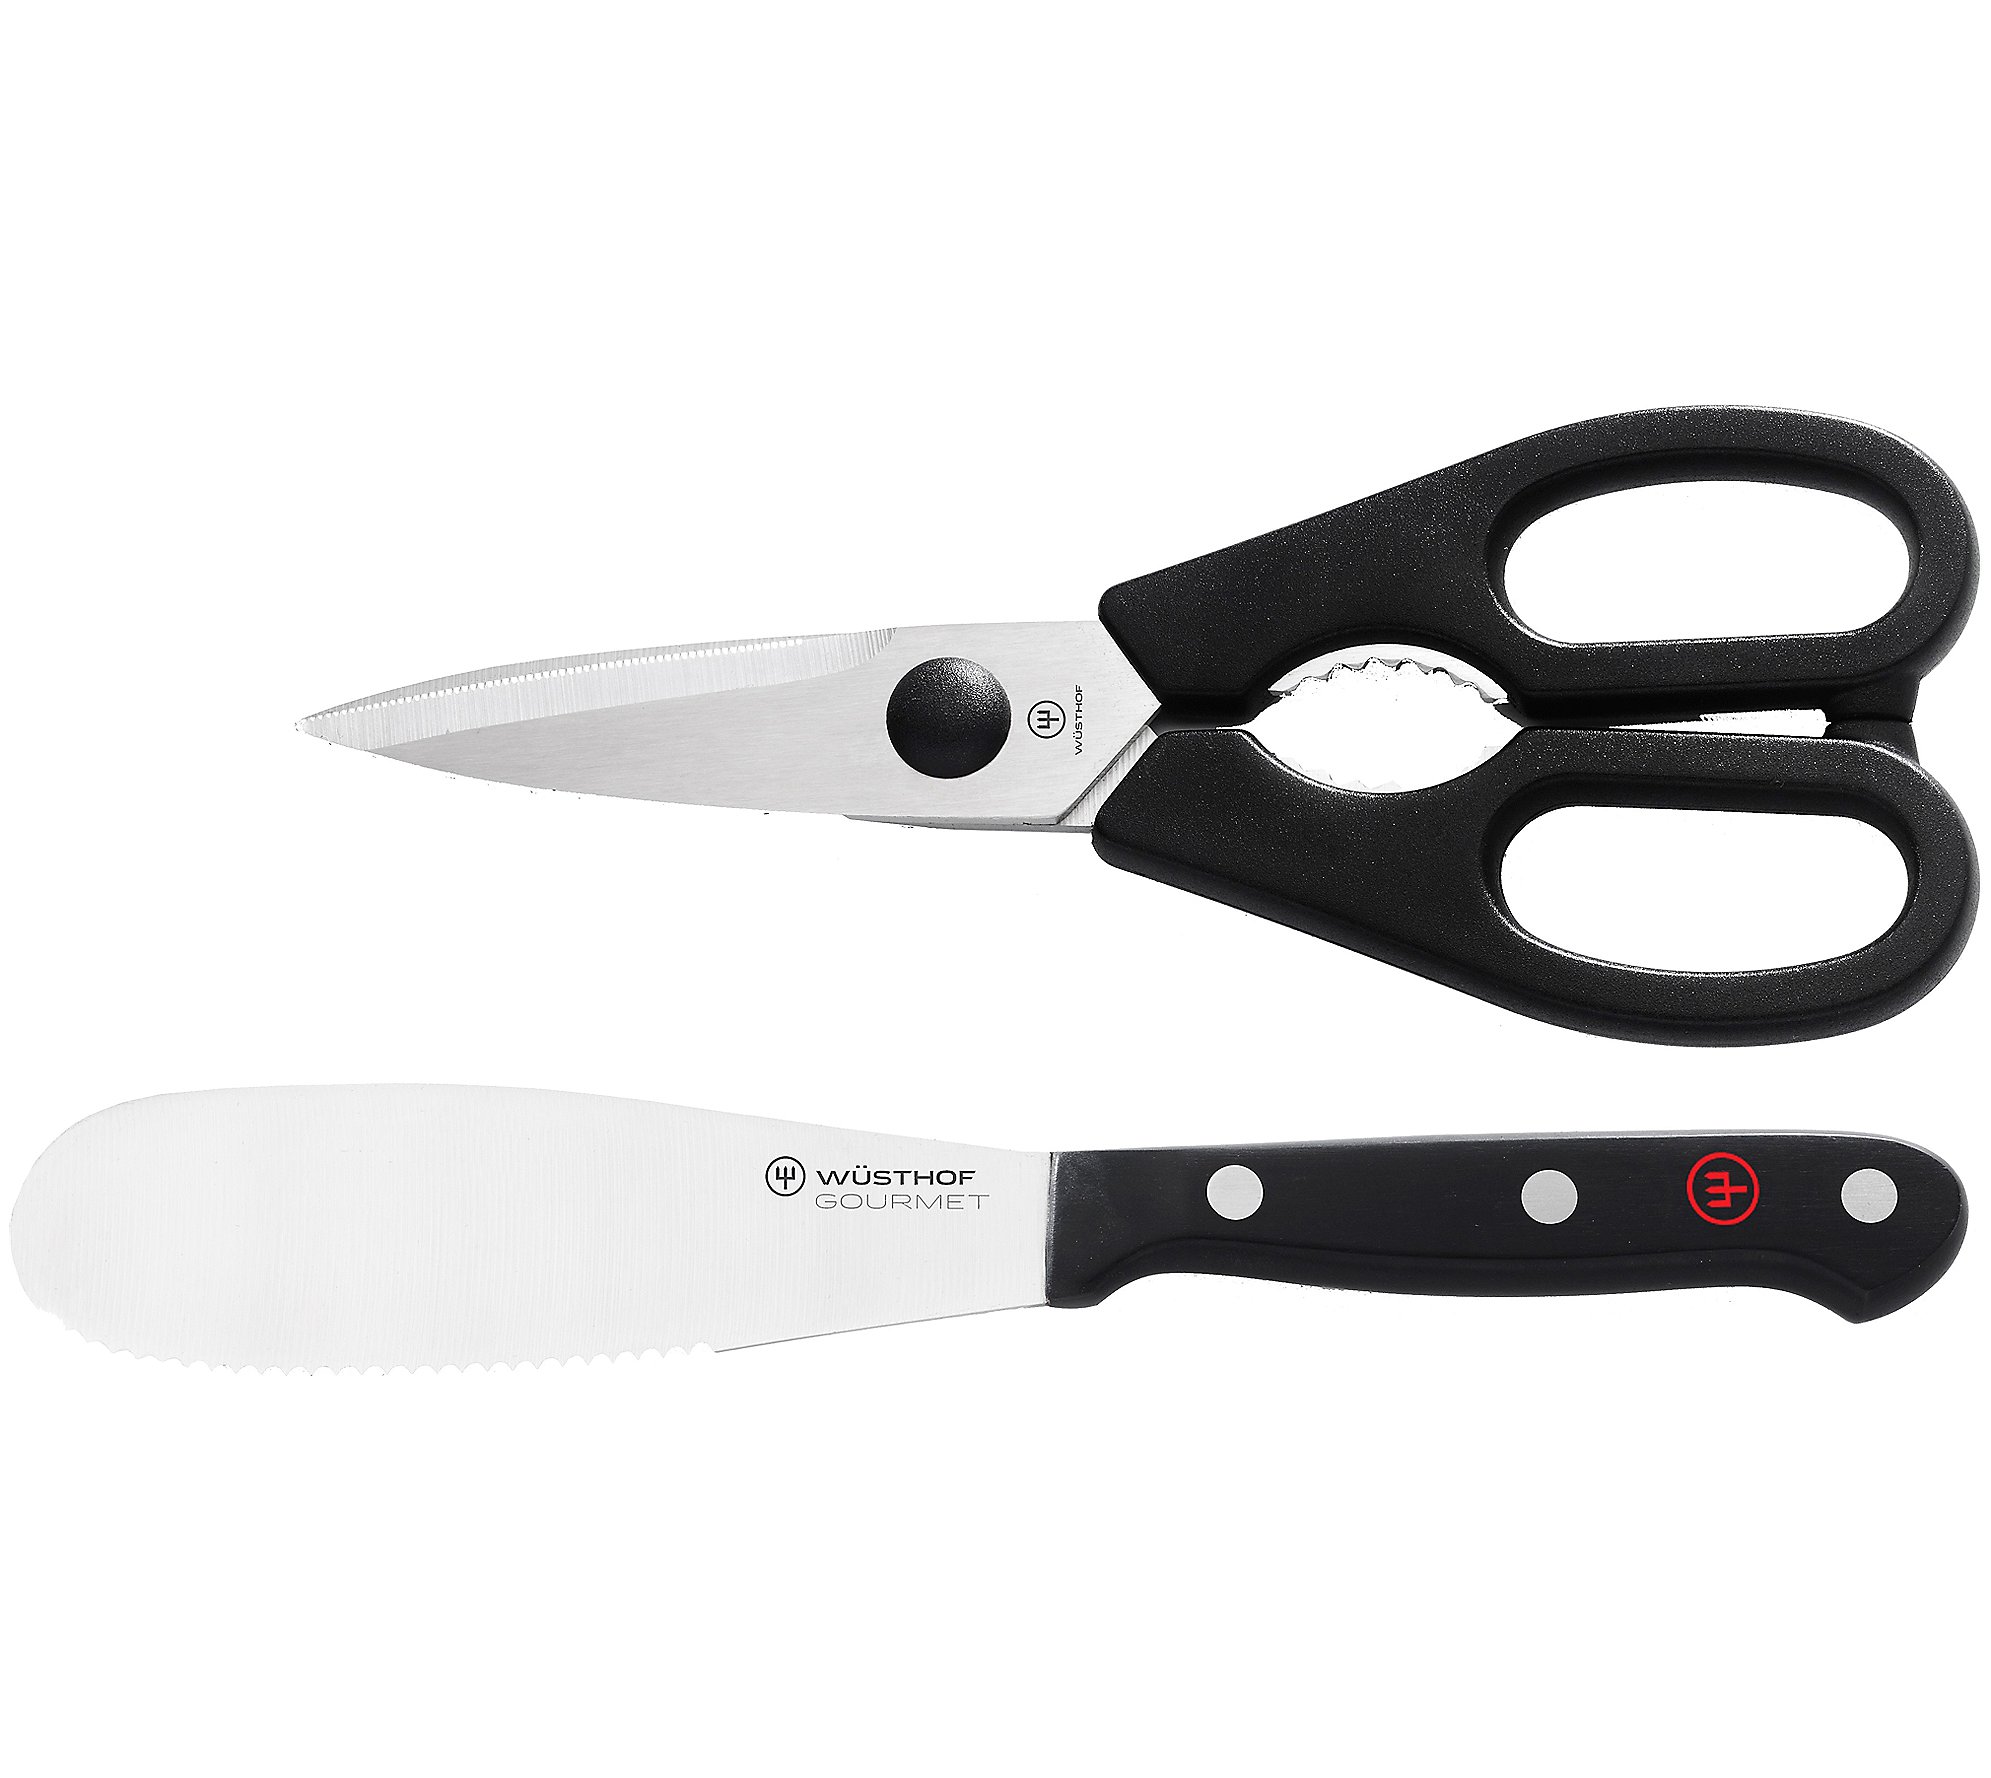 Wusthof 2-Piece Gourmet Spreader and Shears Set